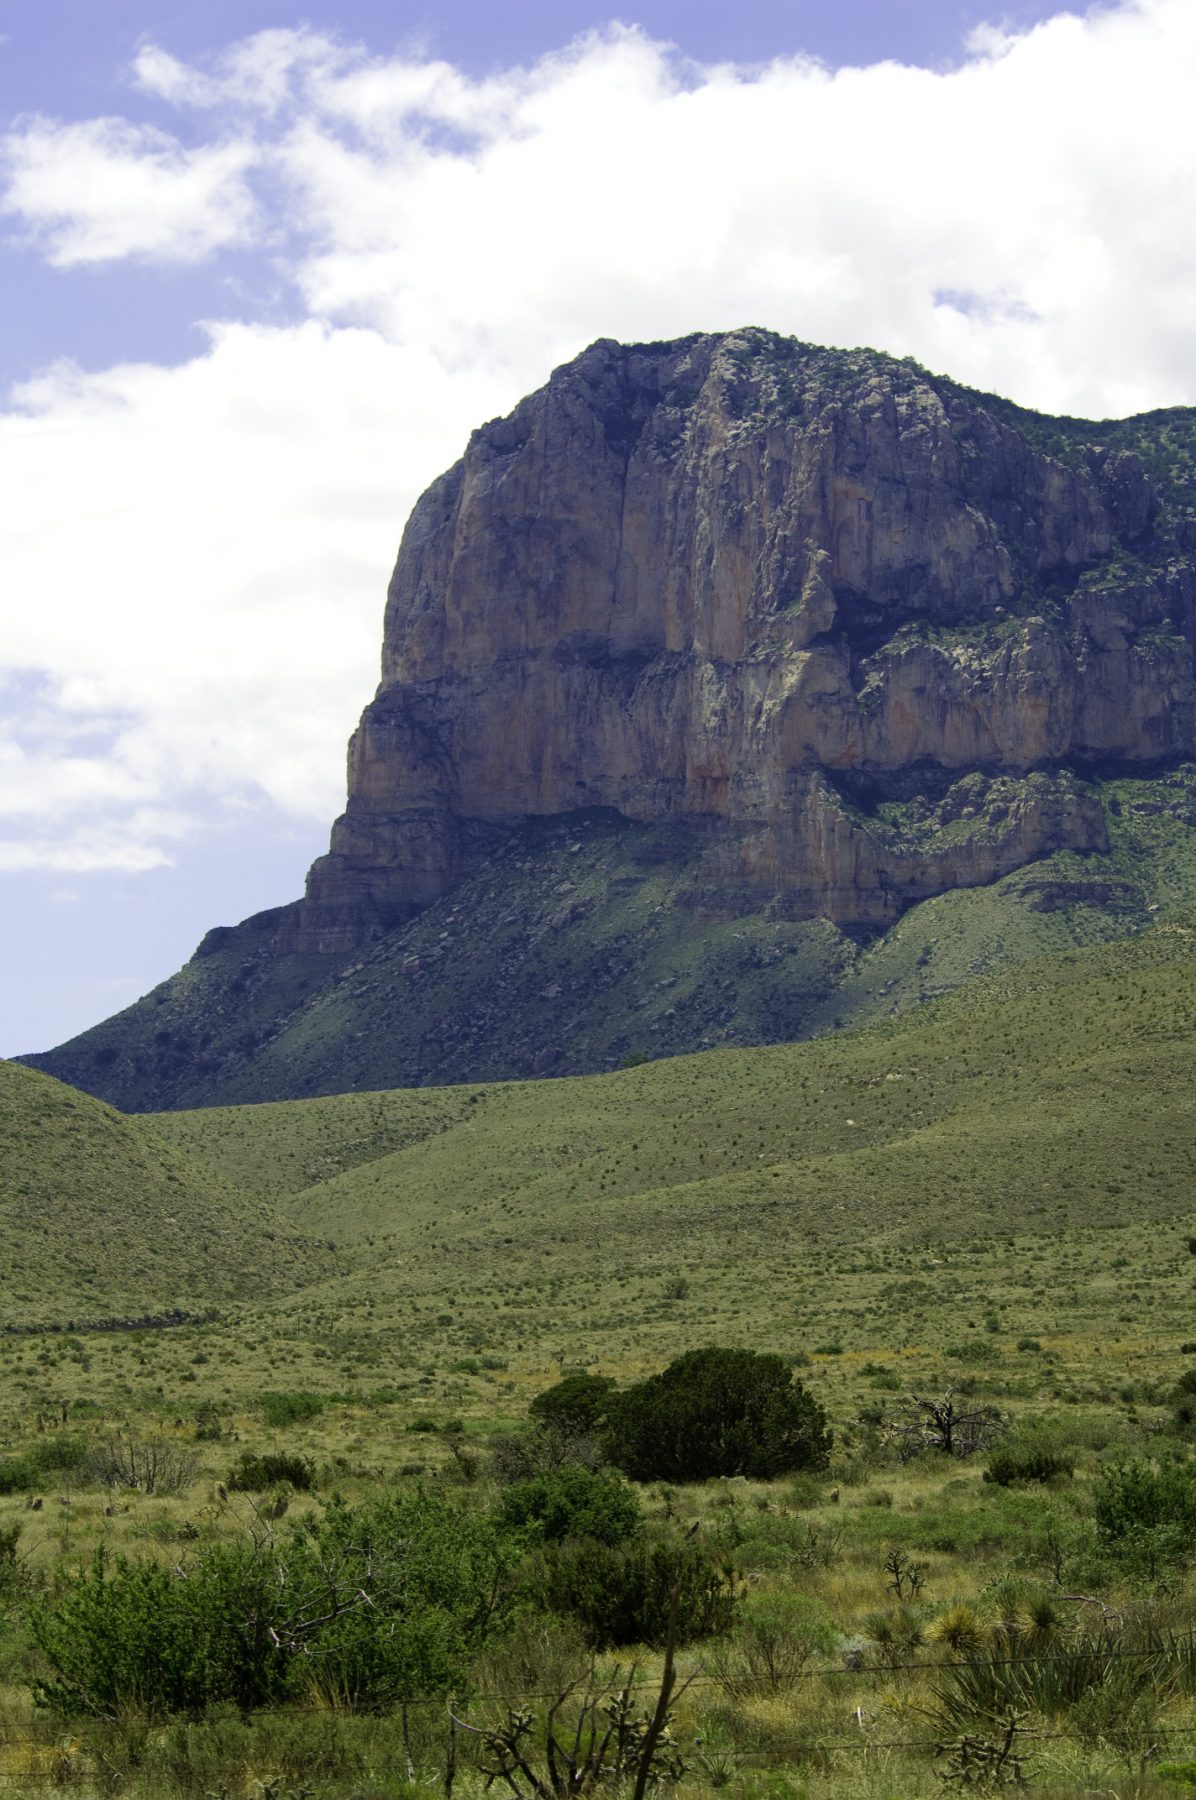 A mountain peak located in Guadalupe Mountains National Park on a bright day. Photo by Stan A. Williams.